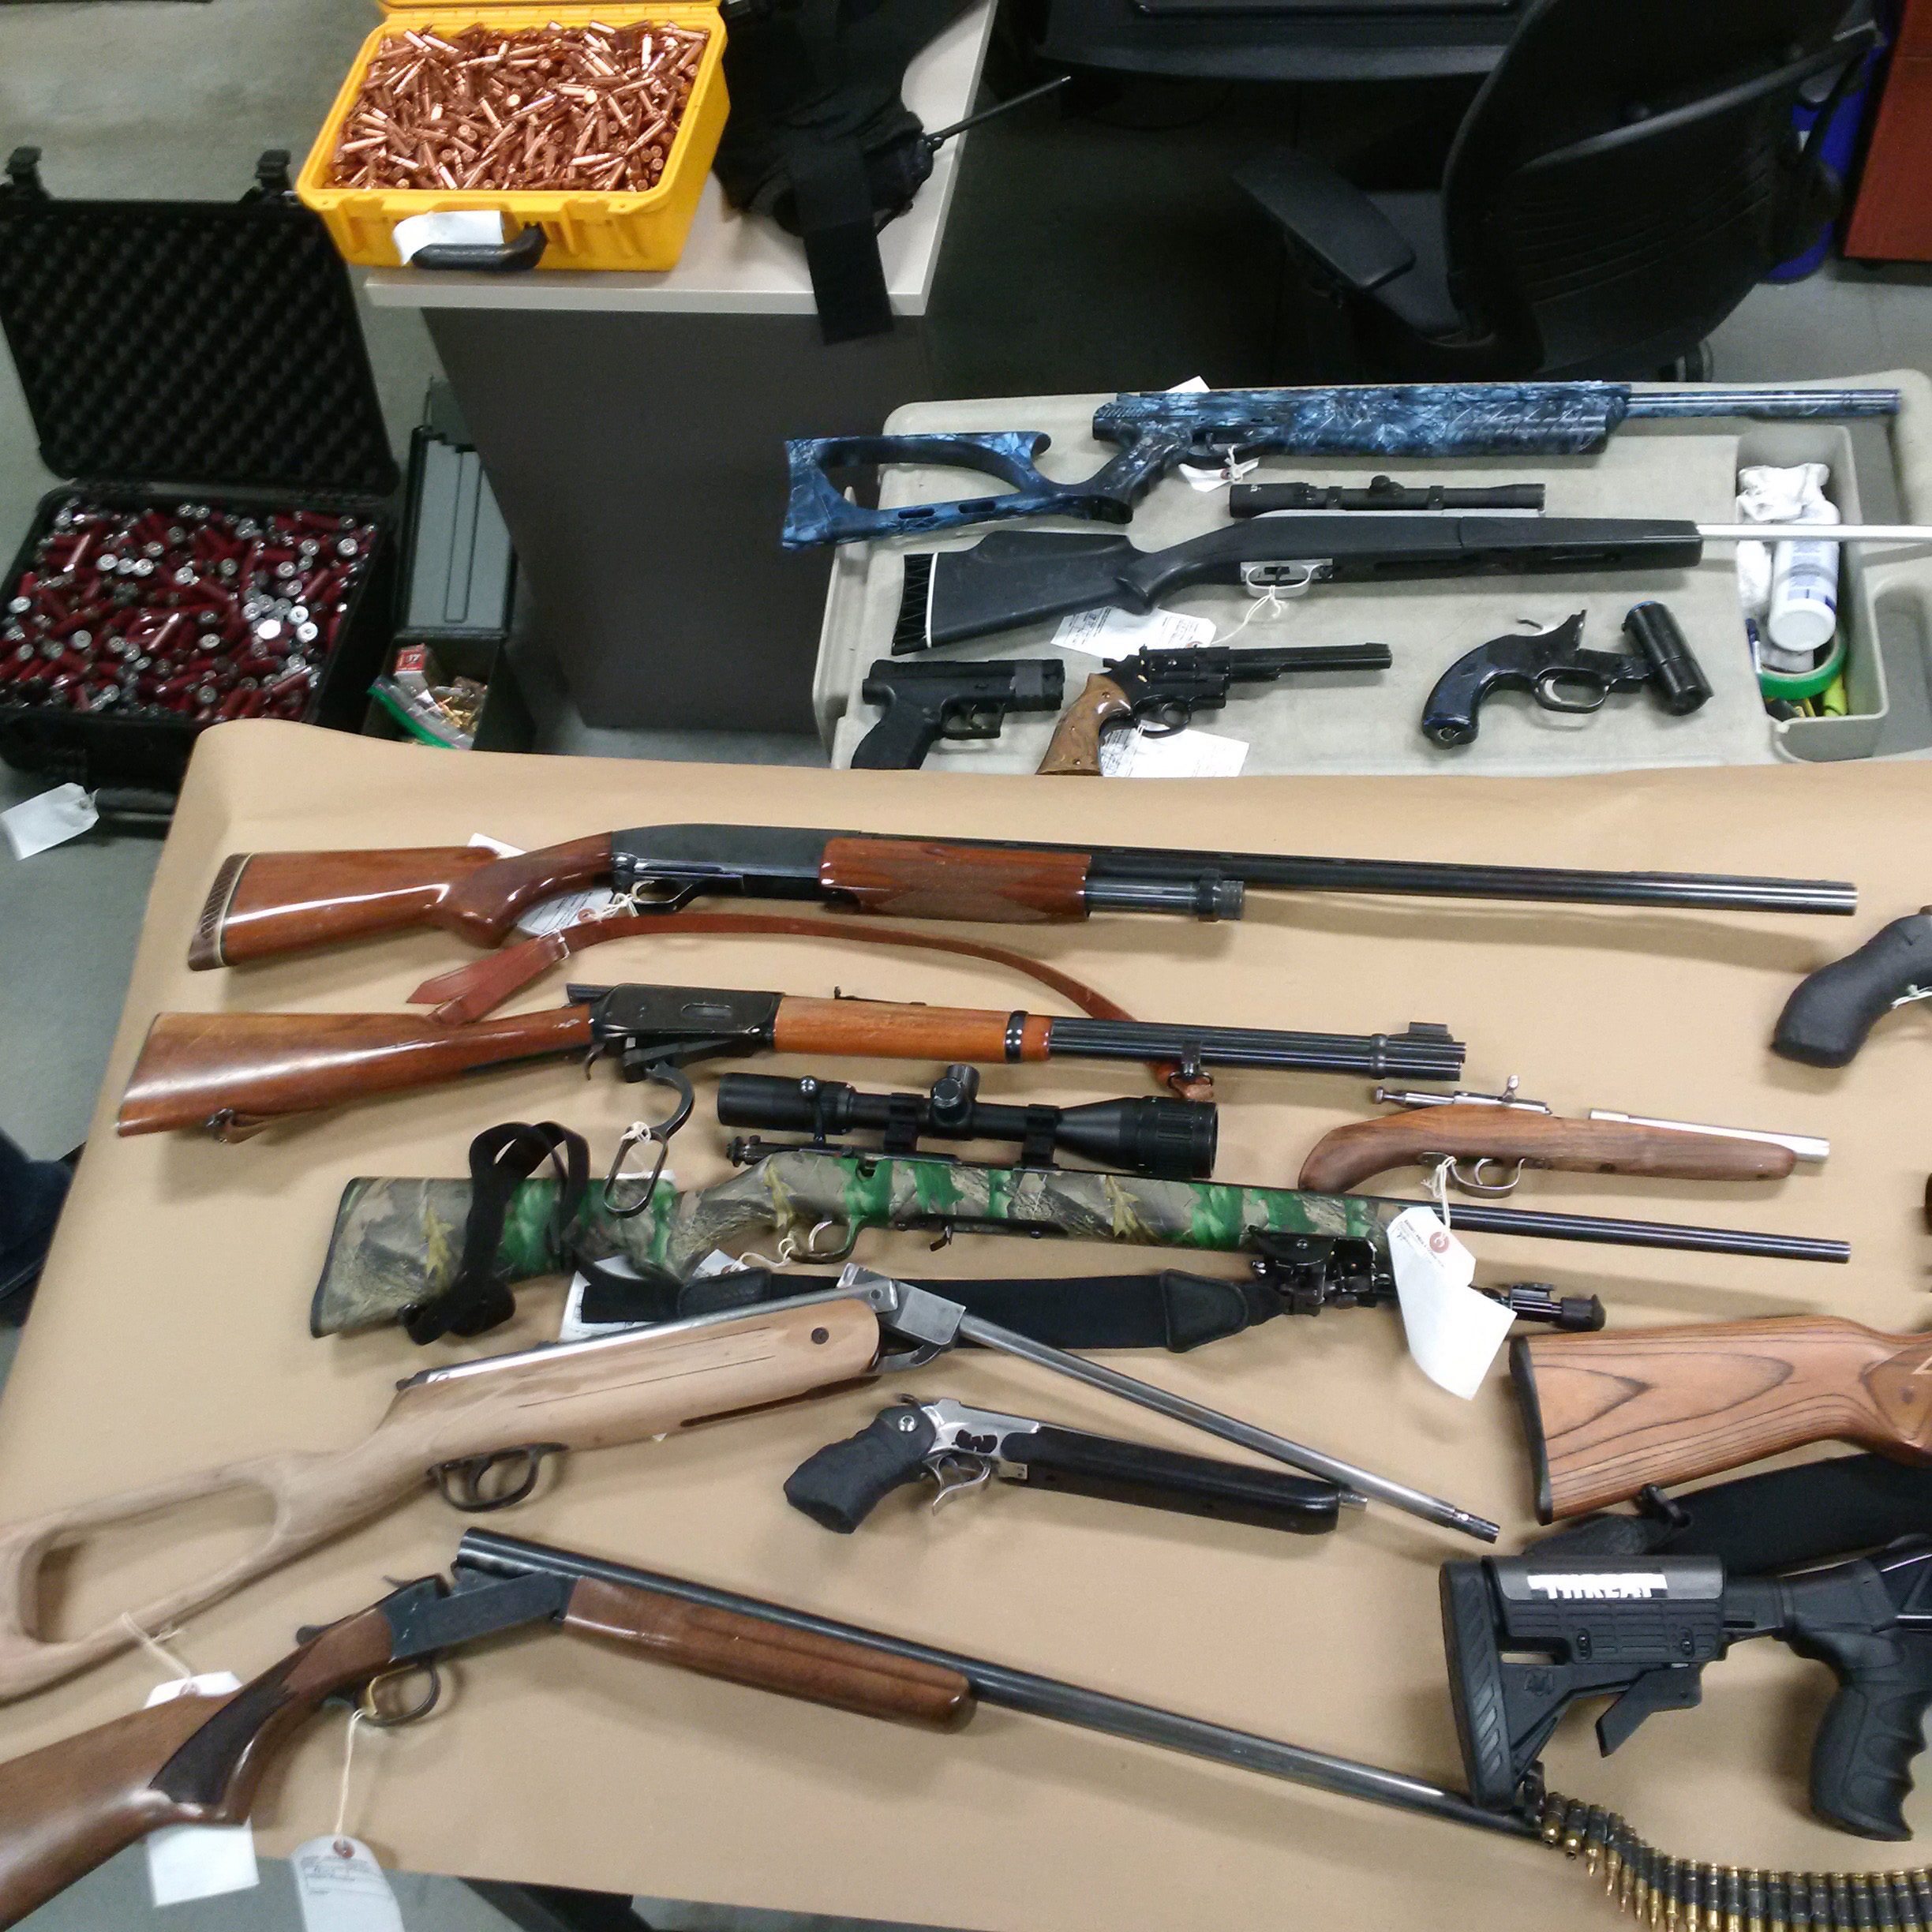 SEIZURE - Red Deer RCMP have seized 14 firearms and ammunition after they executed a search warrant at a residence in Normandeau.